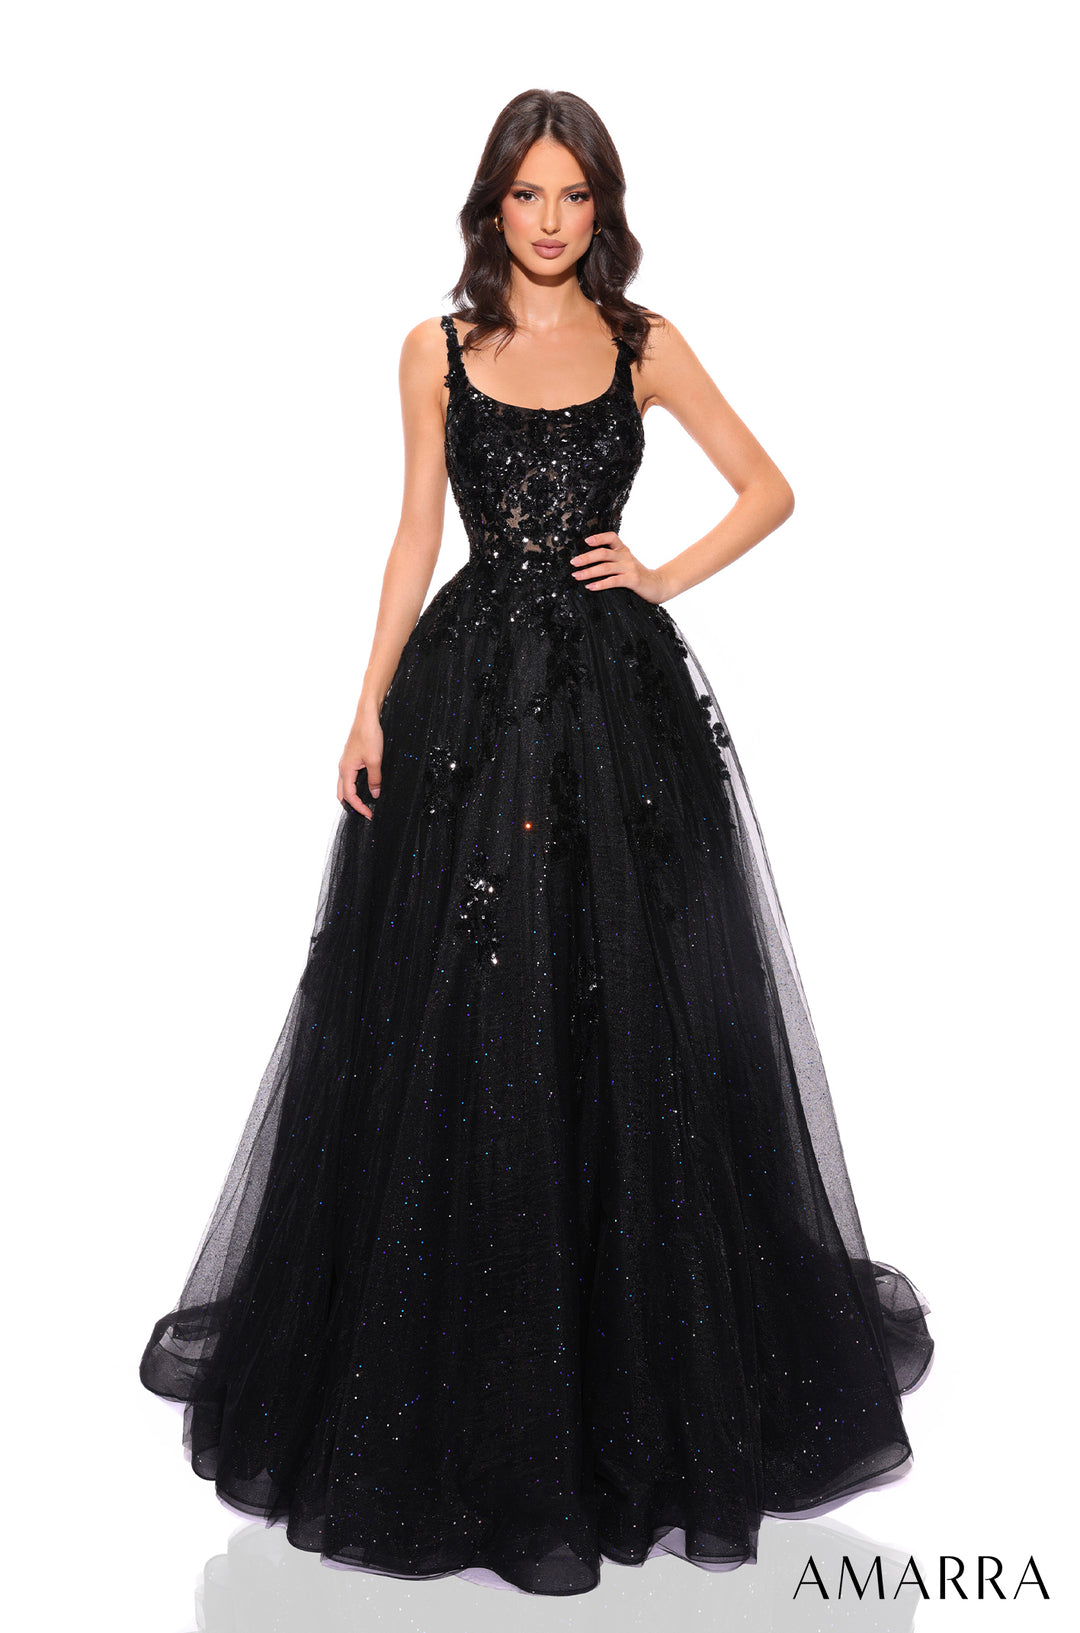 Sequin Applique Sleeveless Ball Gown by Amarra 88749